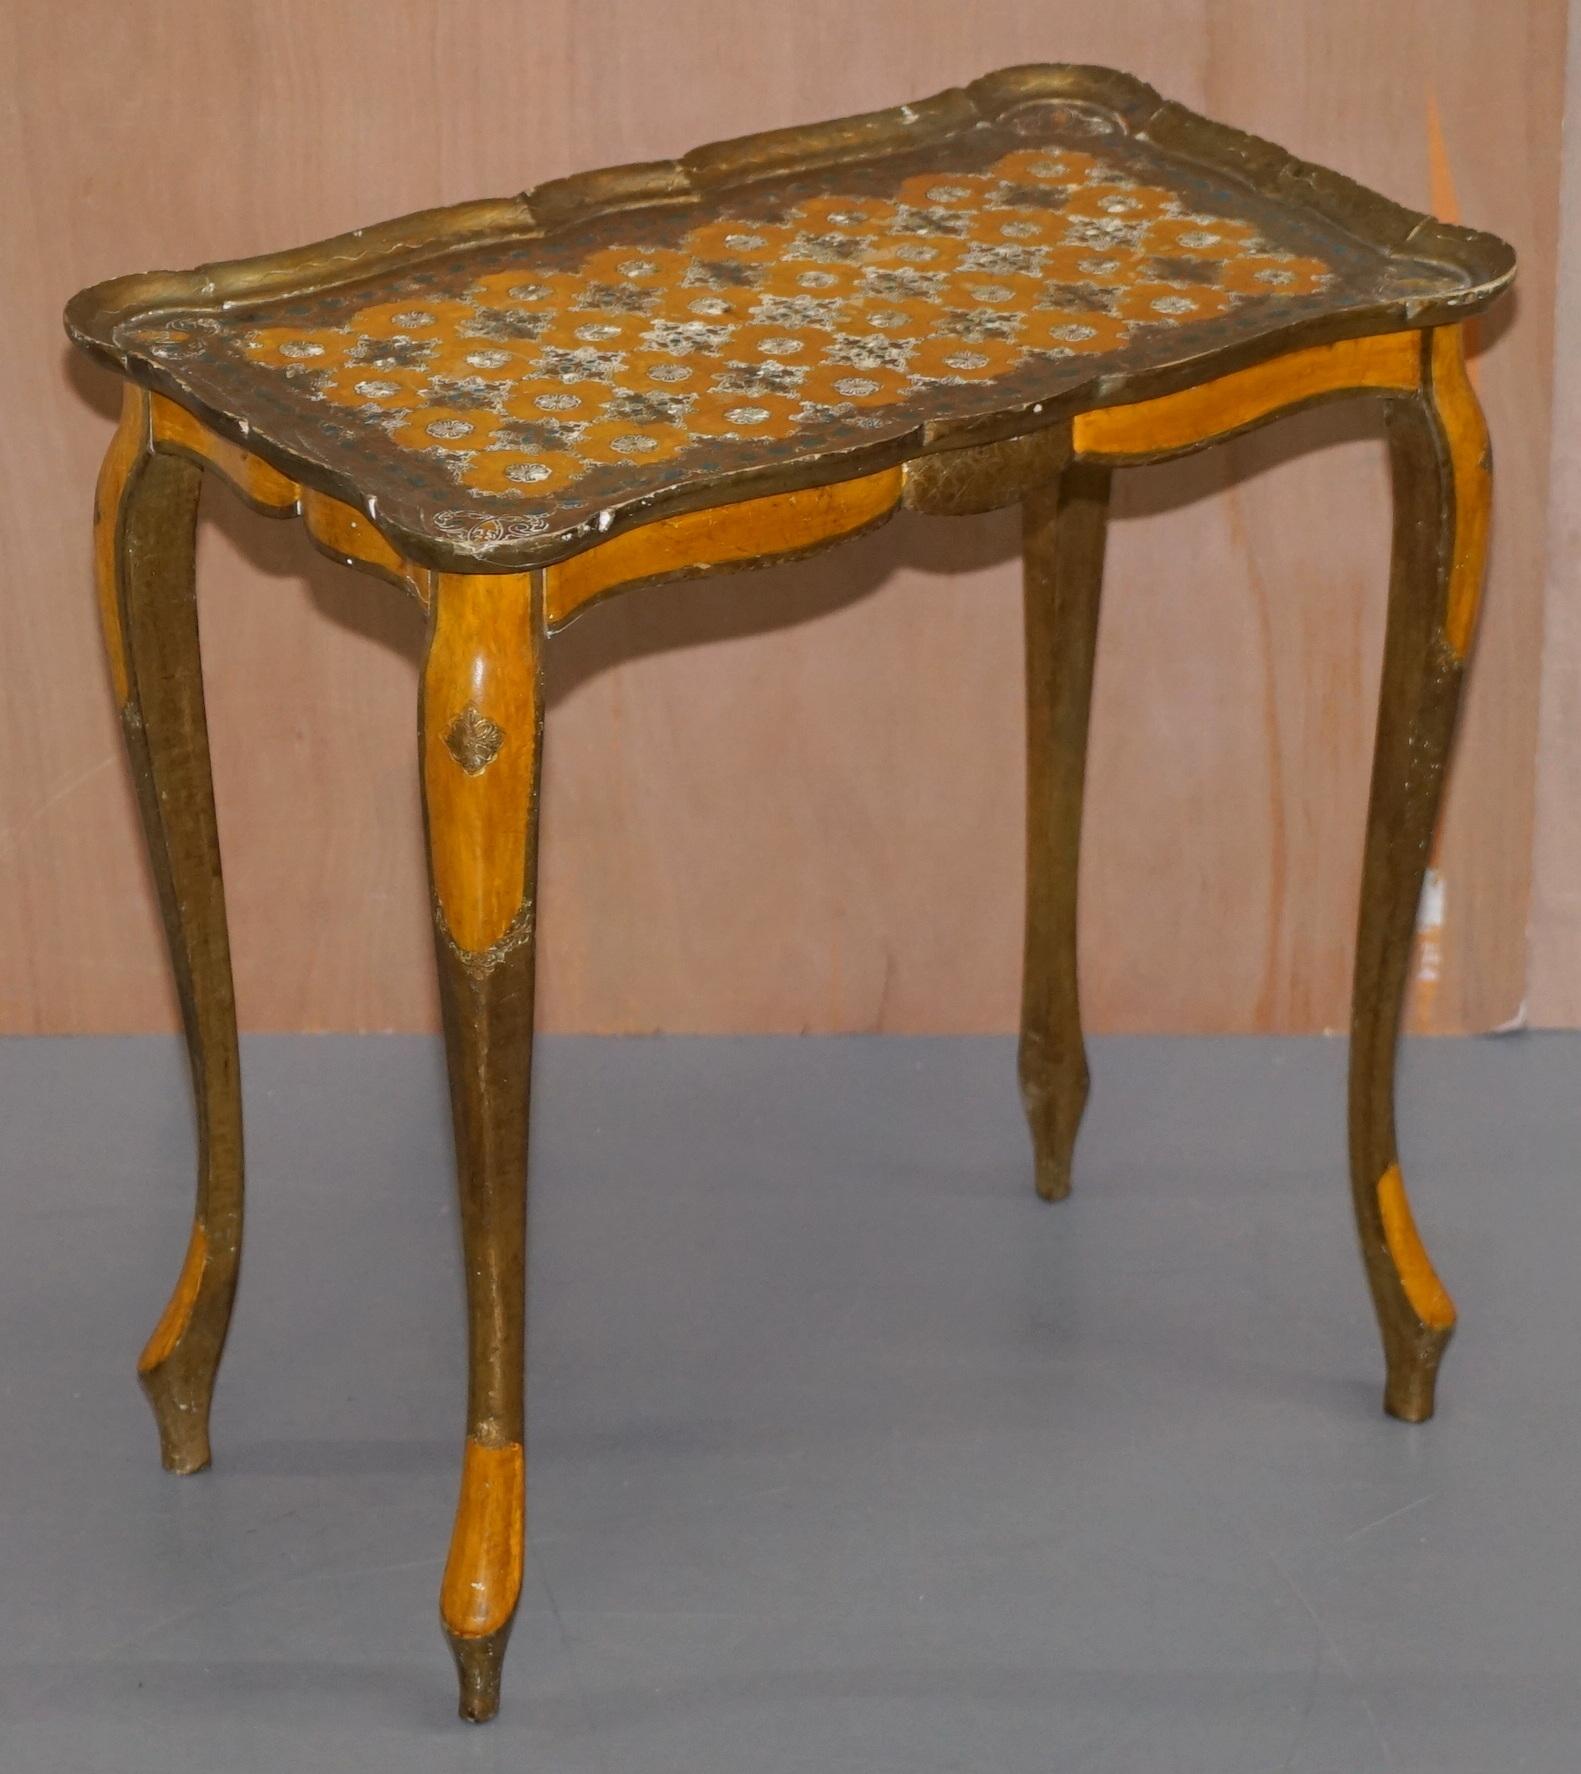 We are delighted to offer for sale this lovely hand painted made in Italy G. Serraglini Firenze stamped tables

A very good looking well made set, they are hand painted with gold leaf, the colours are rich and vibrant, they have a distressed 200